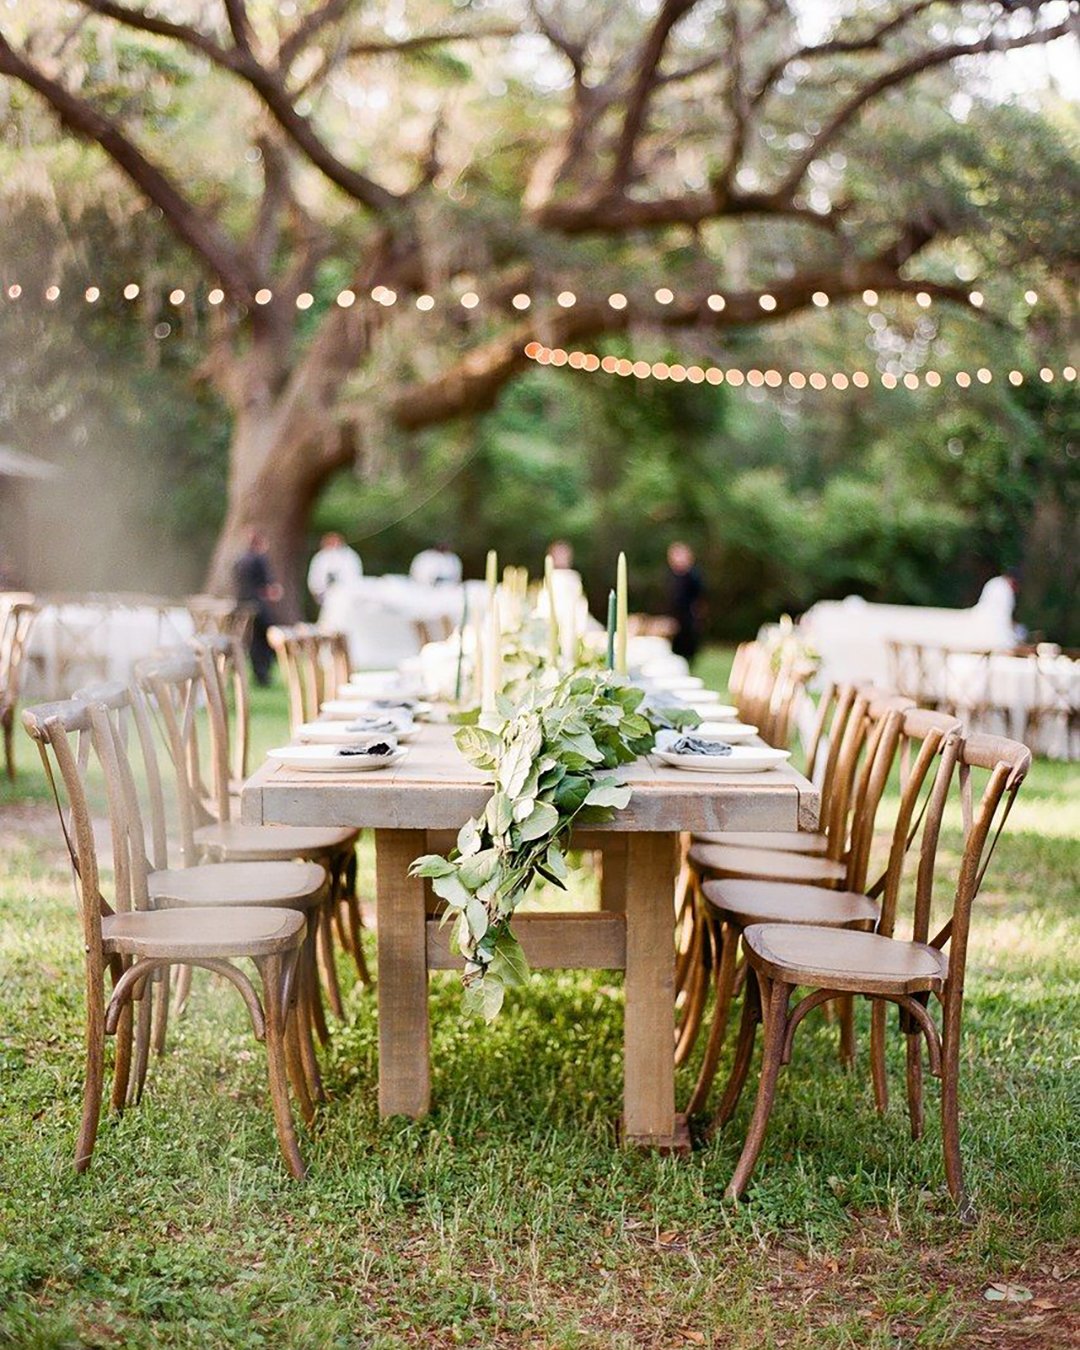 all wedding decorations leaves table runner clayaustinphotography